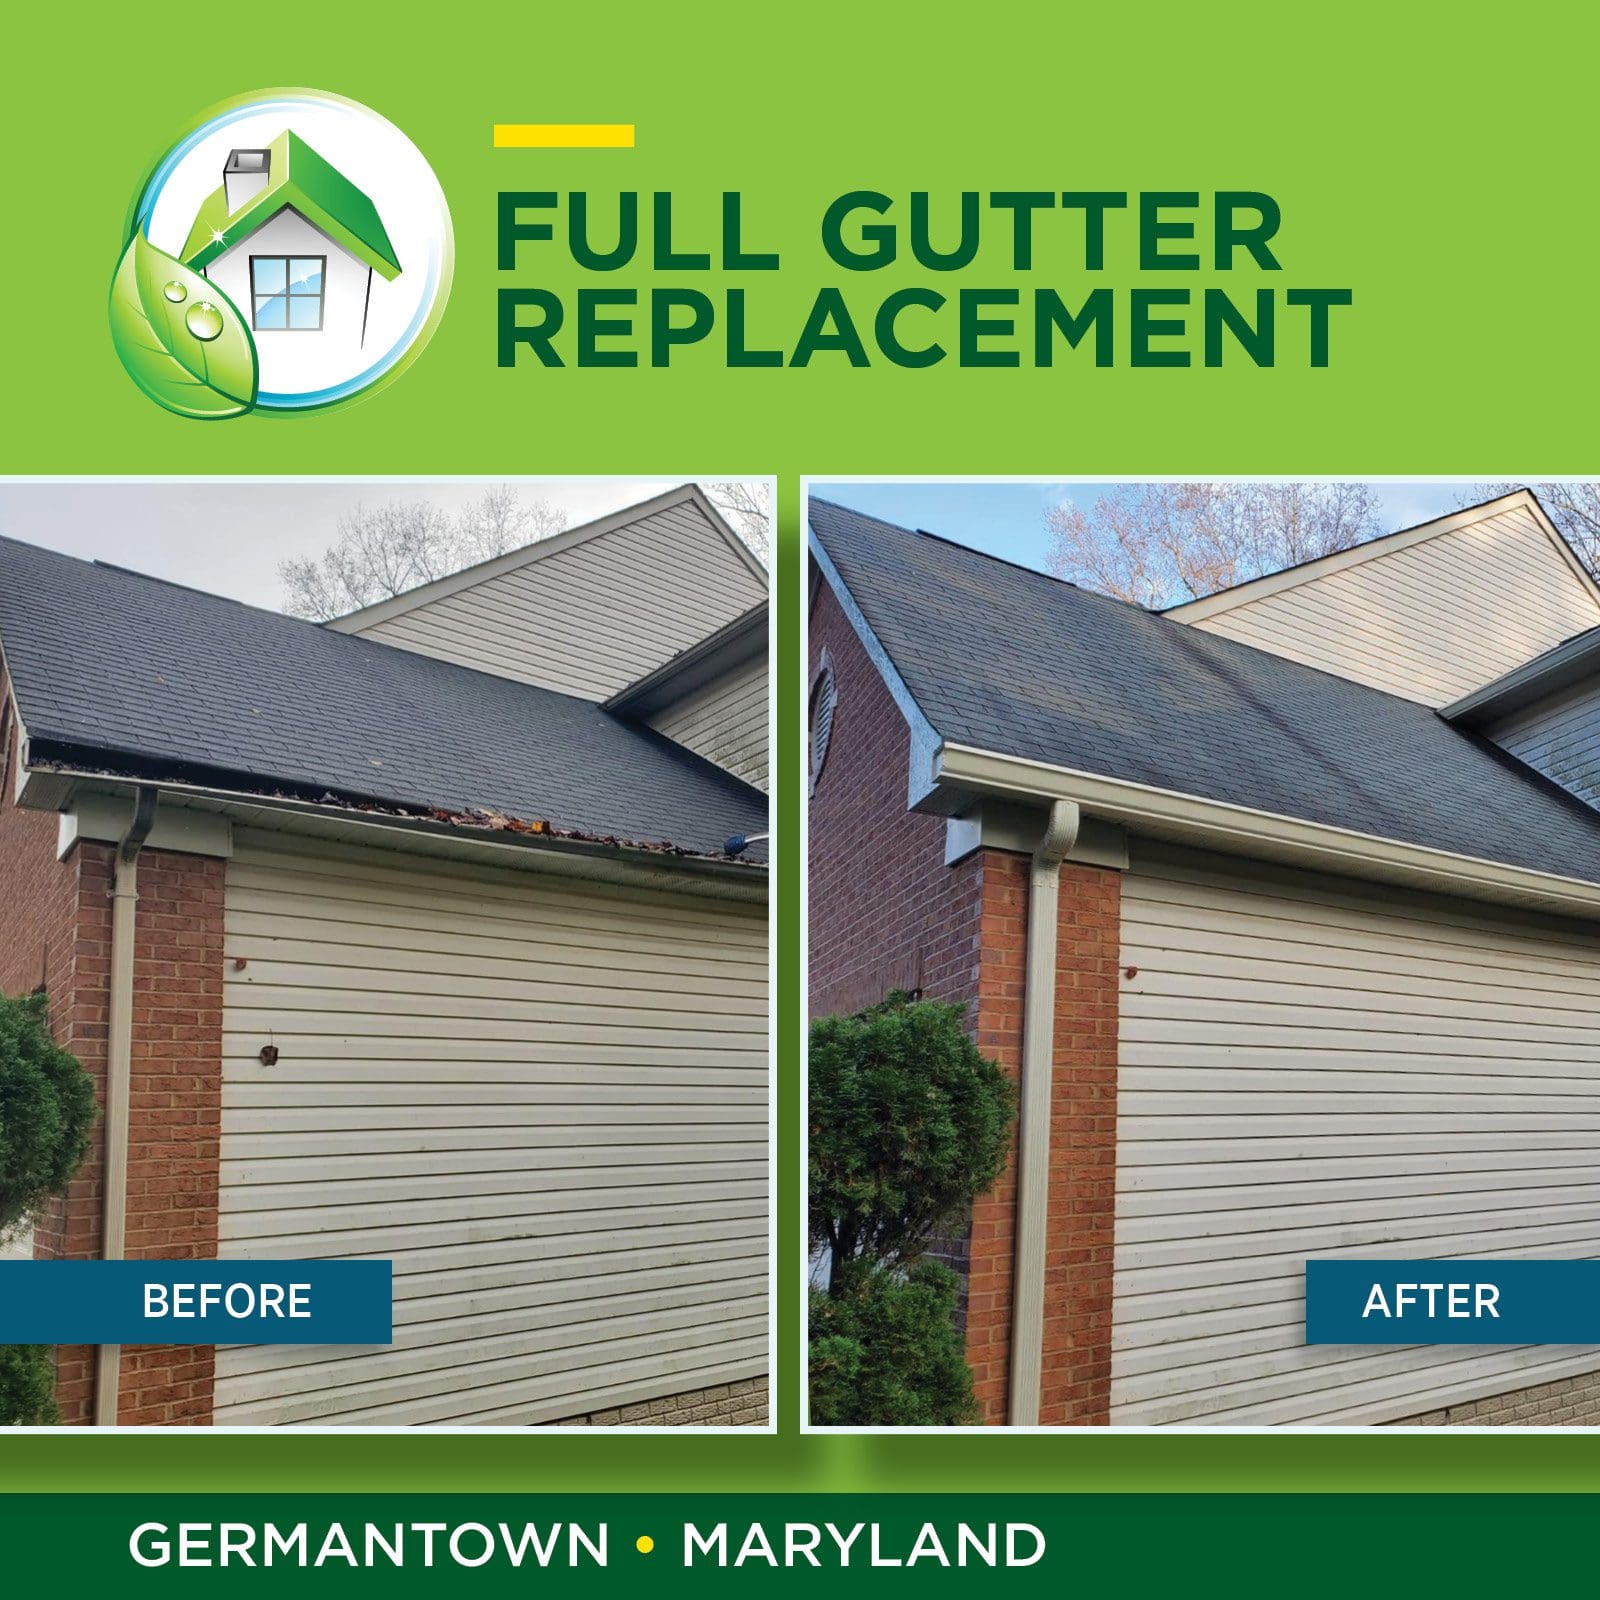 Full gutter replacement in Germantown Maryland